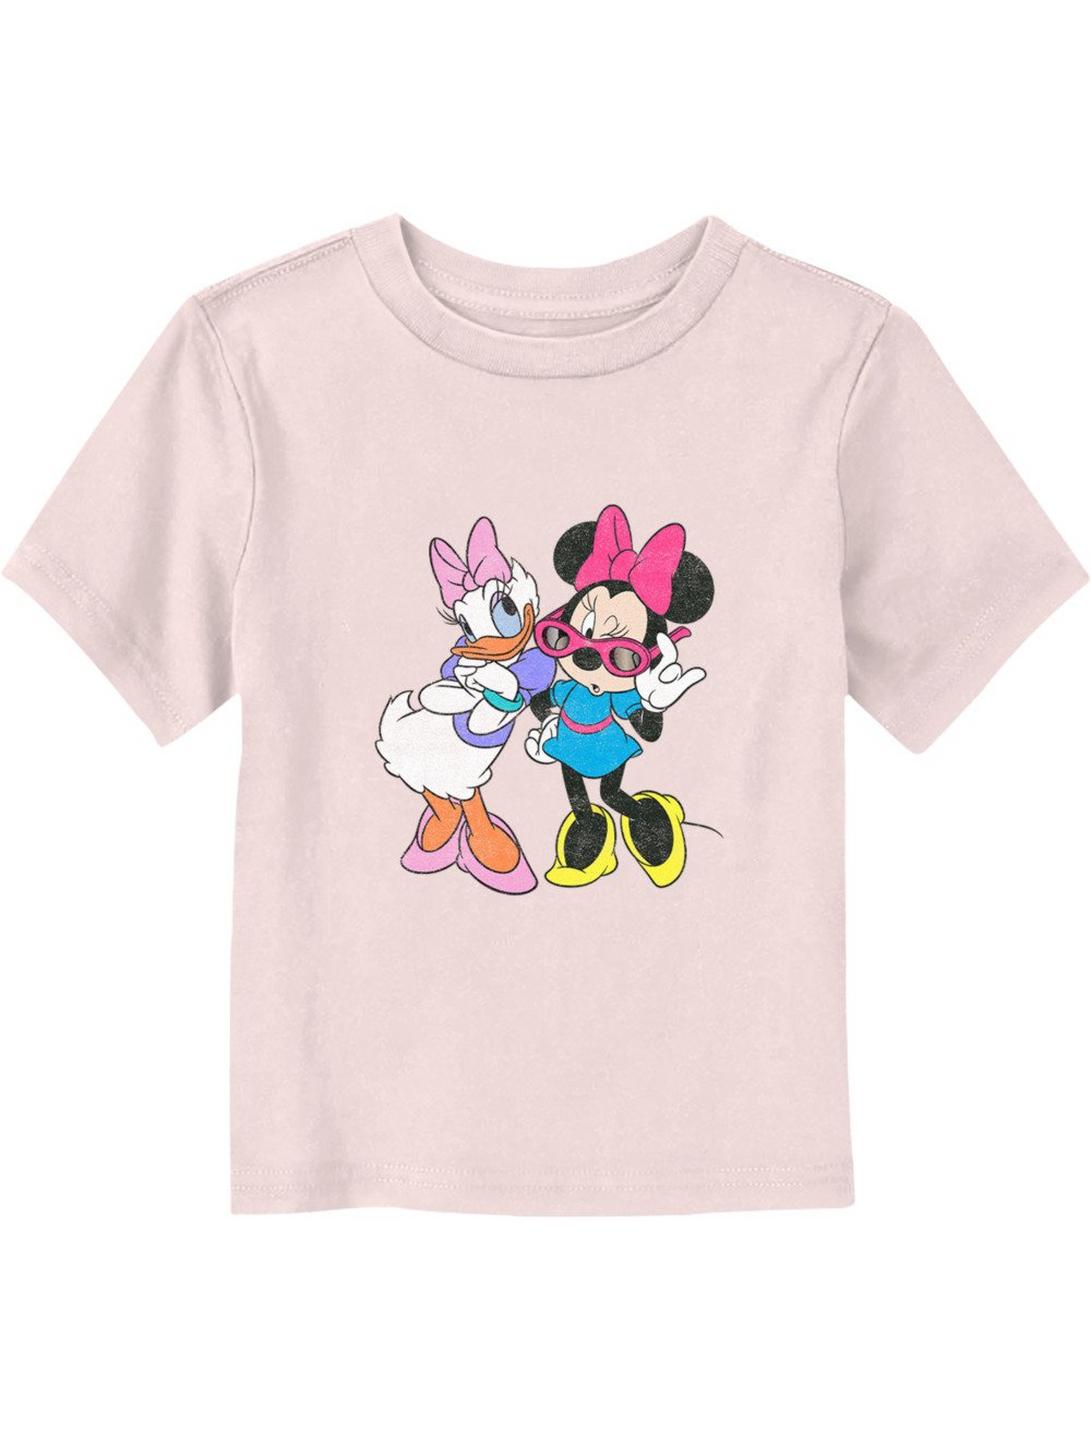 Disney Minnie Mouse And Daisy Duck Toddler T-Shirt, LIGHT PINK, hi-res